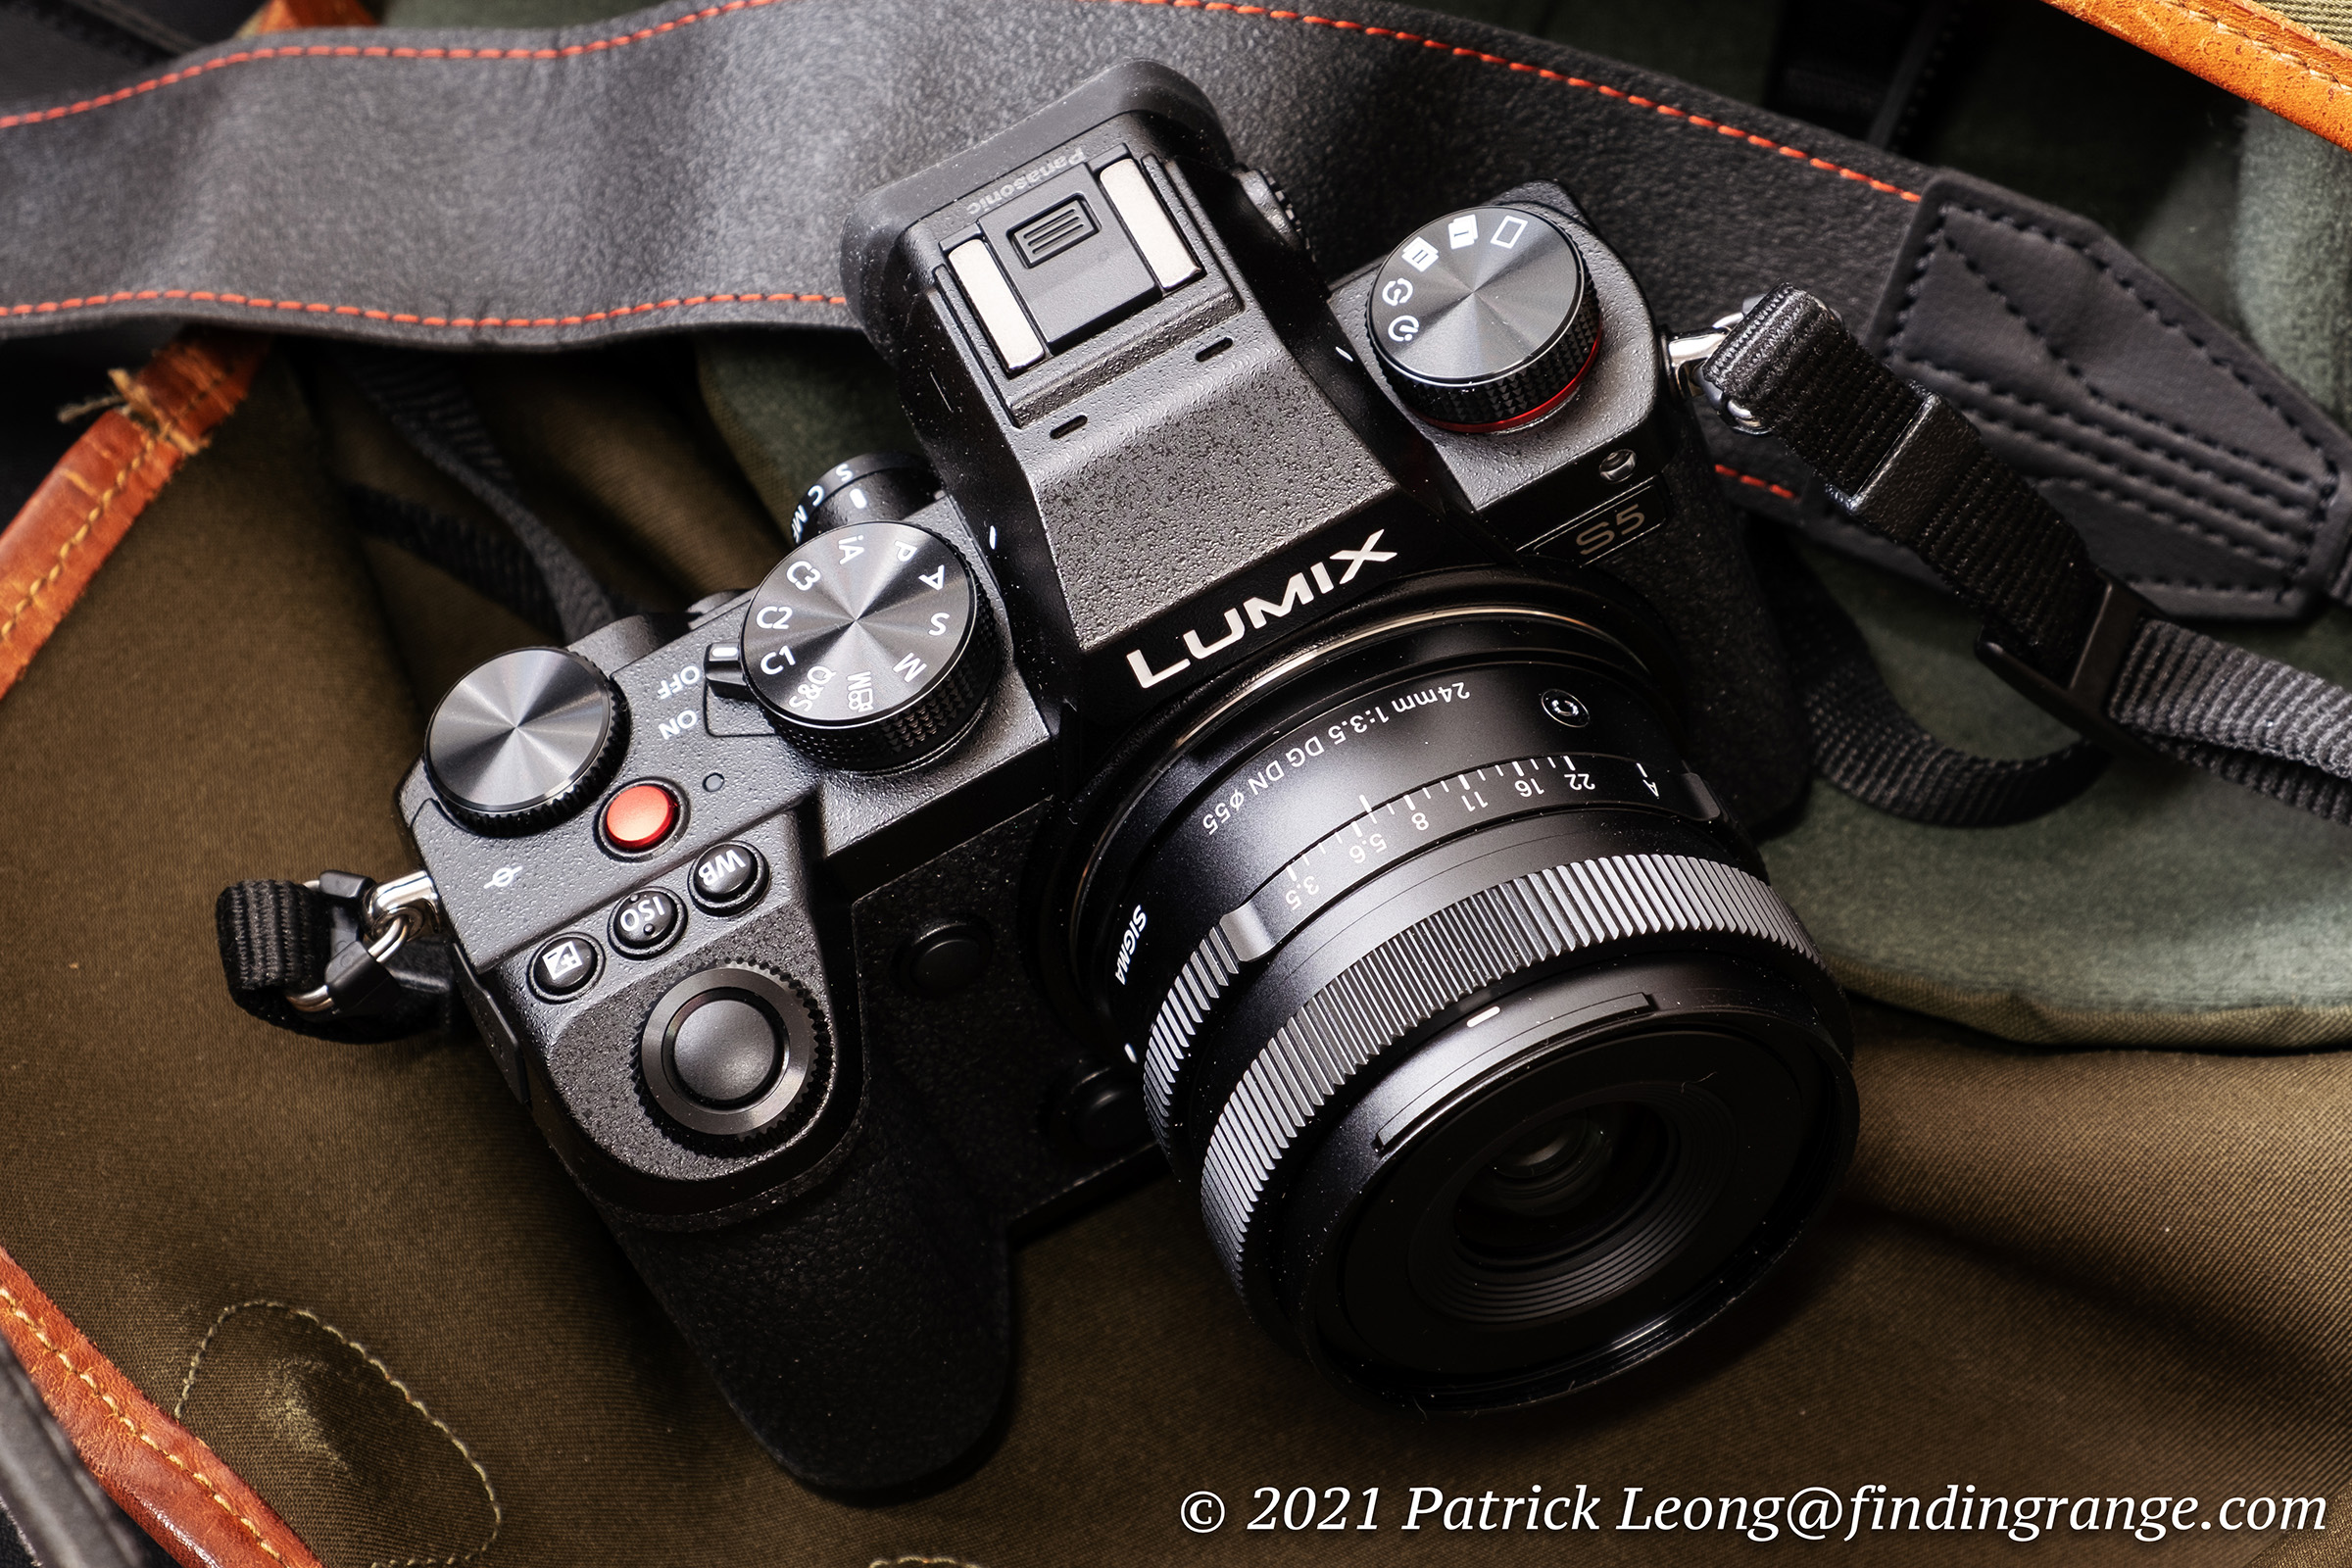 Panasonic S5 II review: The full-frame vlogging camera you've been waiting  for